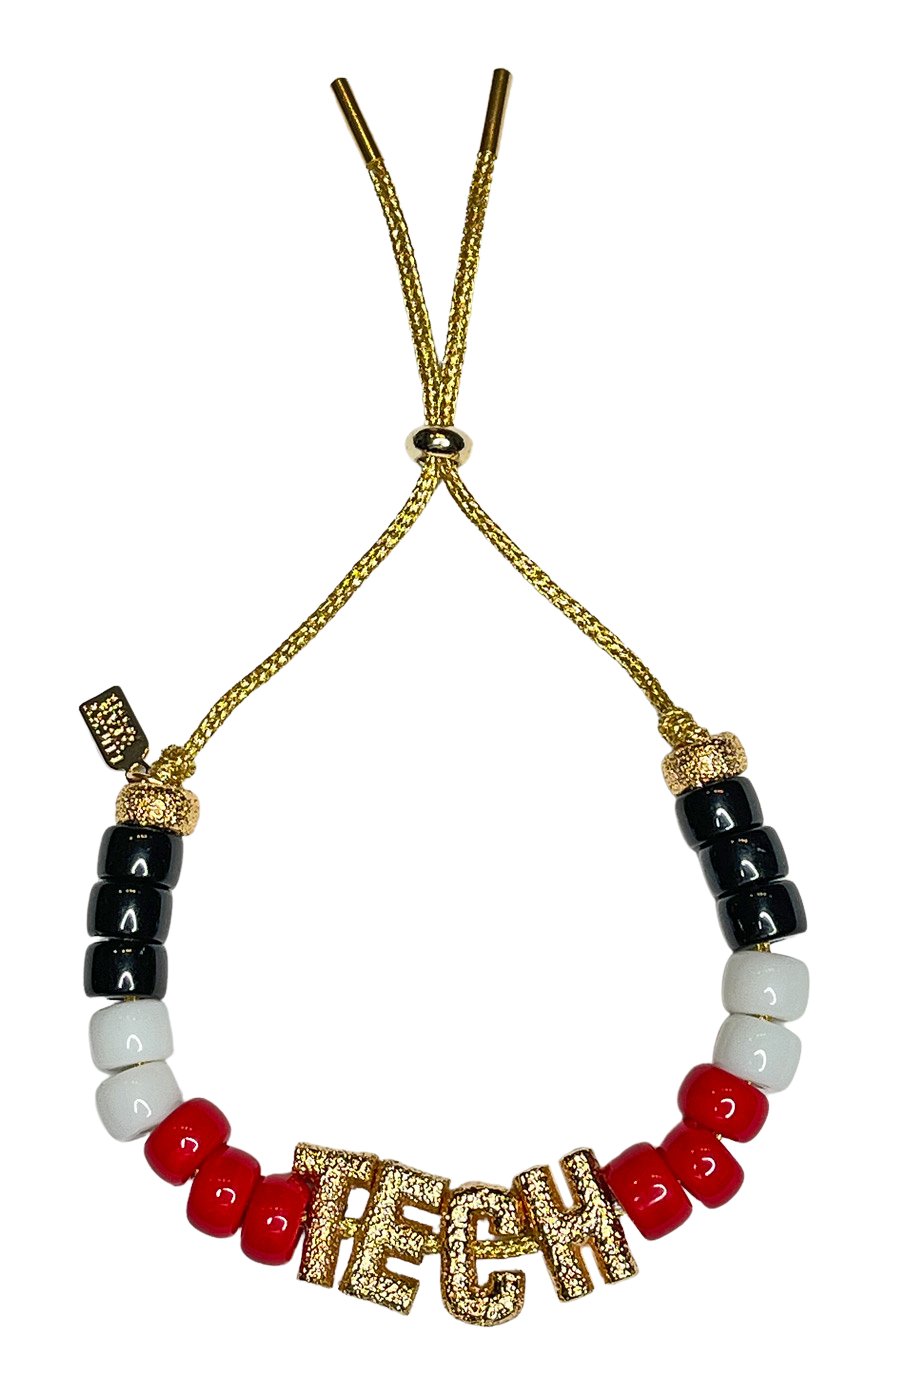 Red + Black Eye Candy "Tech" ID Bracelet - Lucky Star Jewels - Color Game